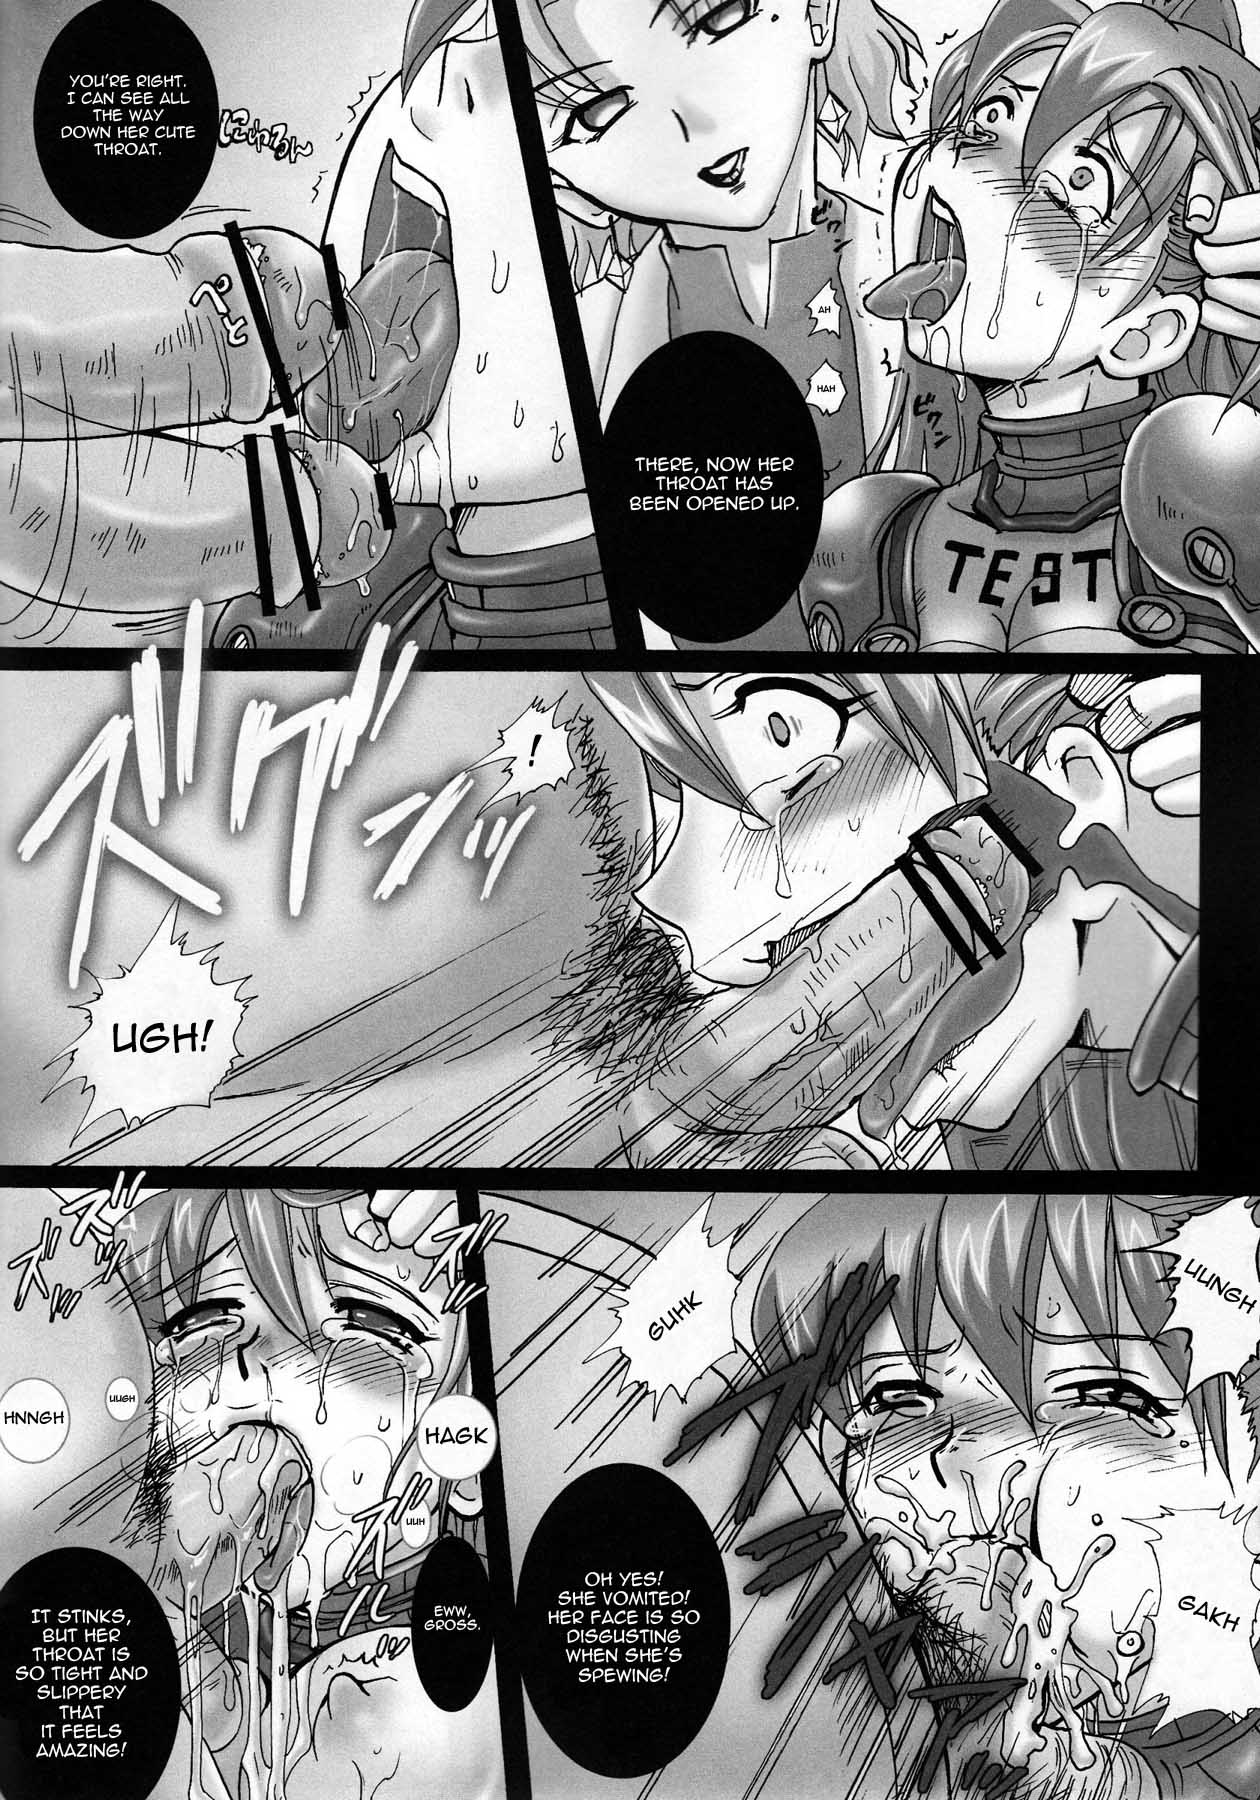 [Modaetei+Abalone Soft] Slave Suit and Fuck Toy (Neon Genesis Evangelion)[English][Little White Butterflies] page 9 full